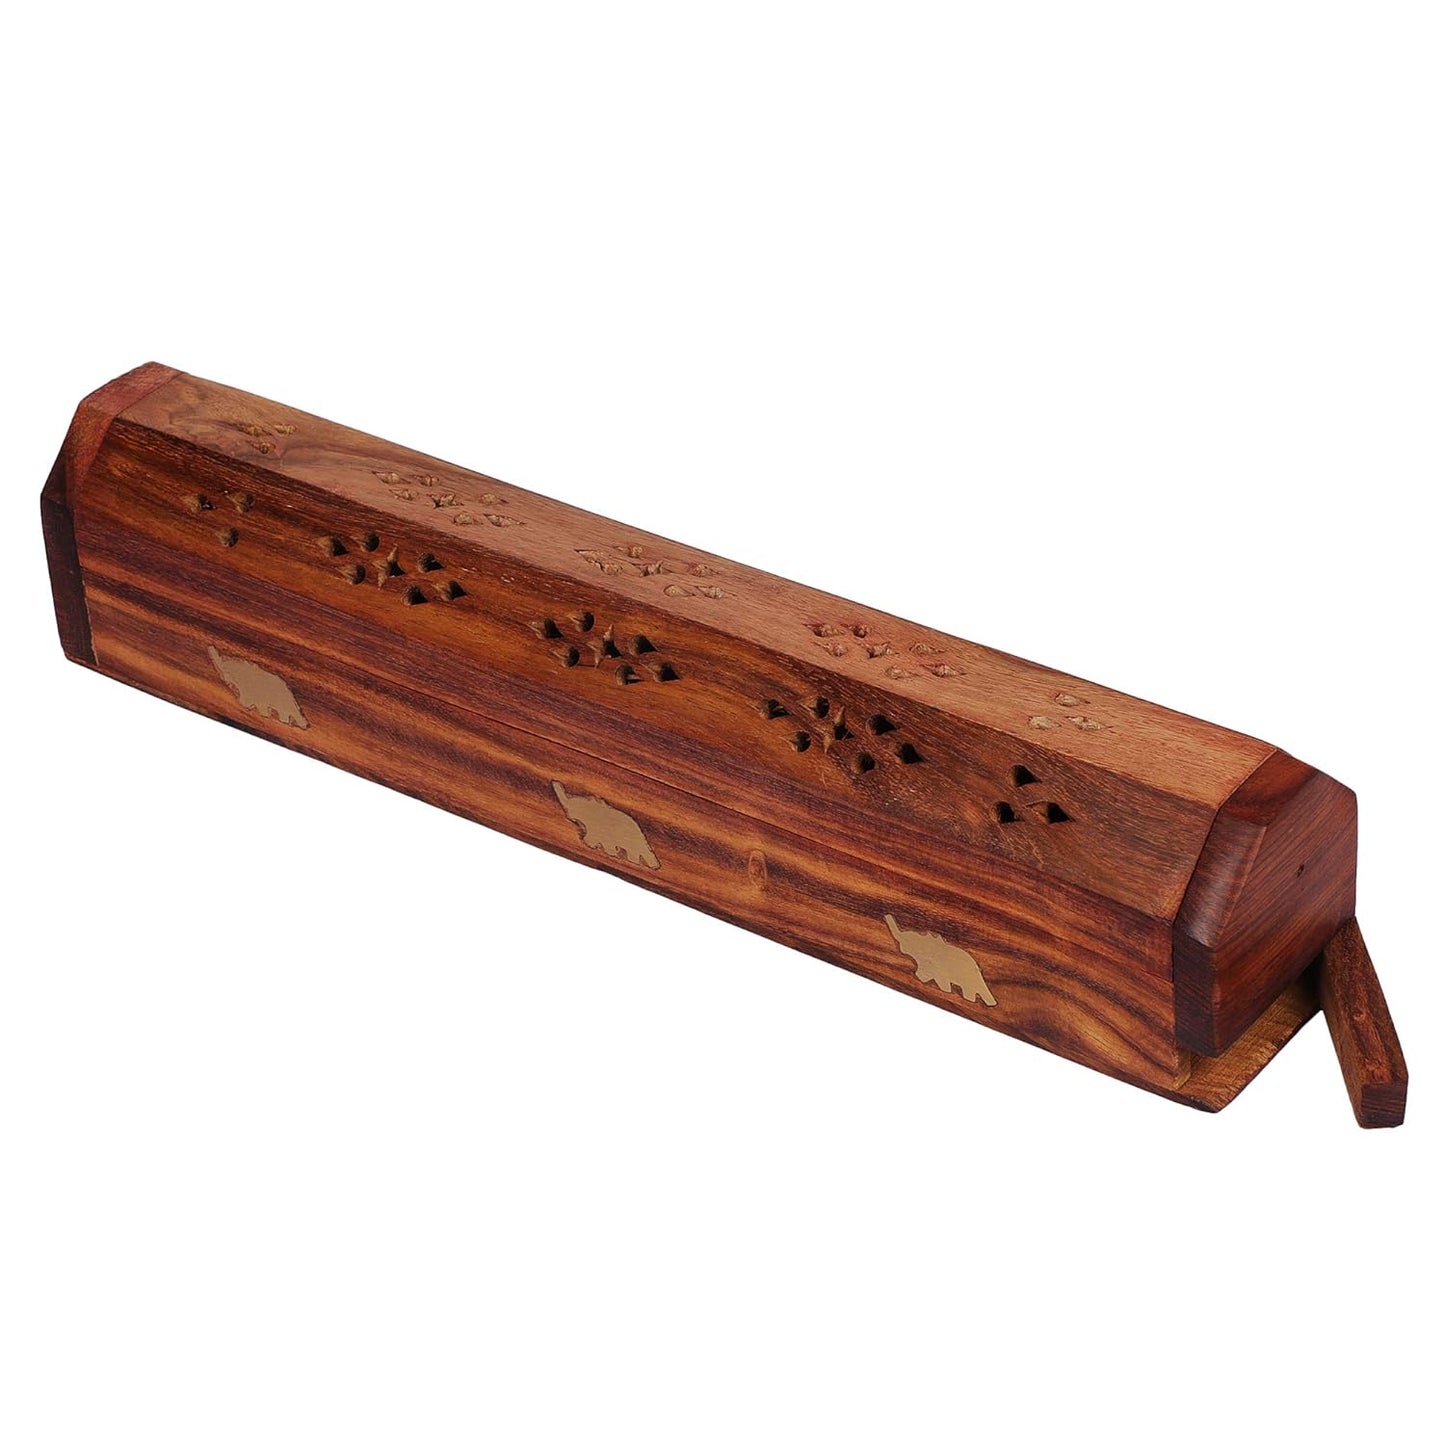 Handmade Rosewood And Brass Incense Cone With Incense Stick Holder